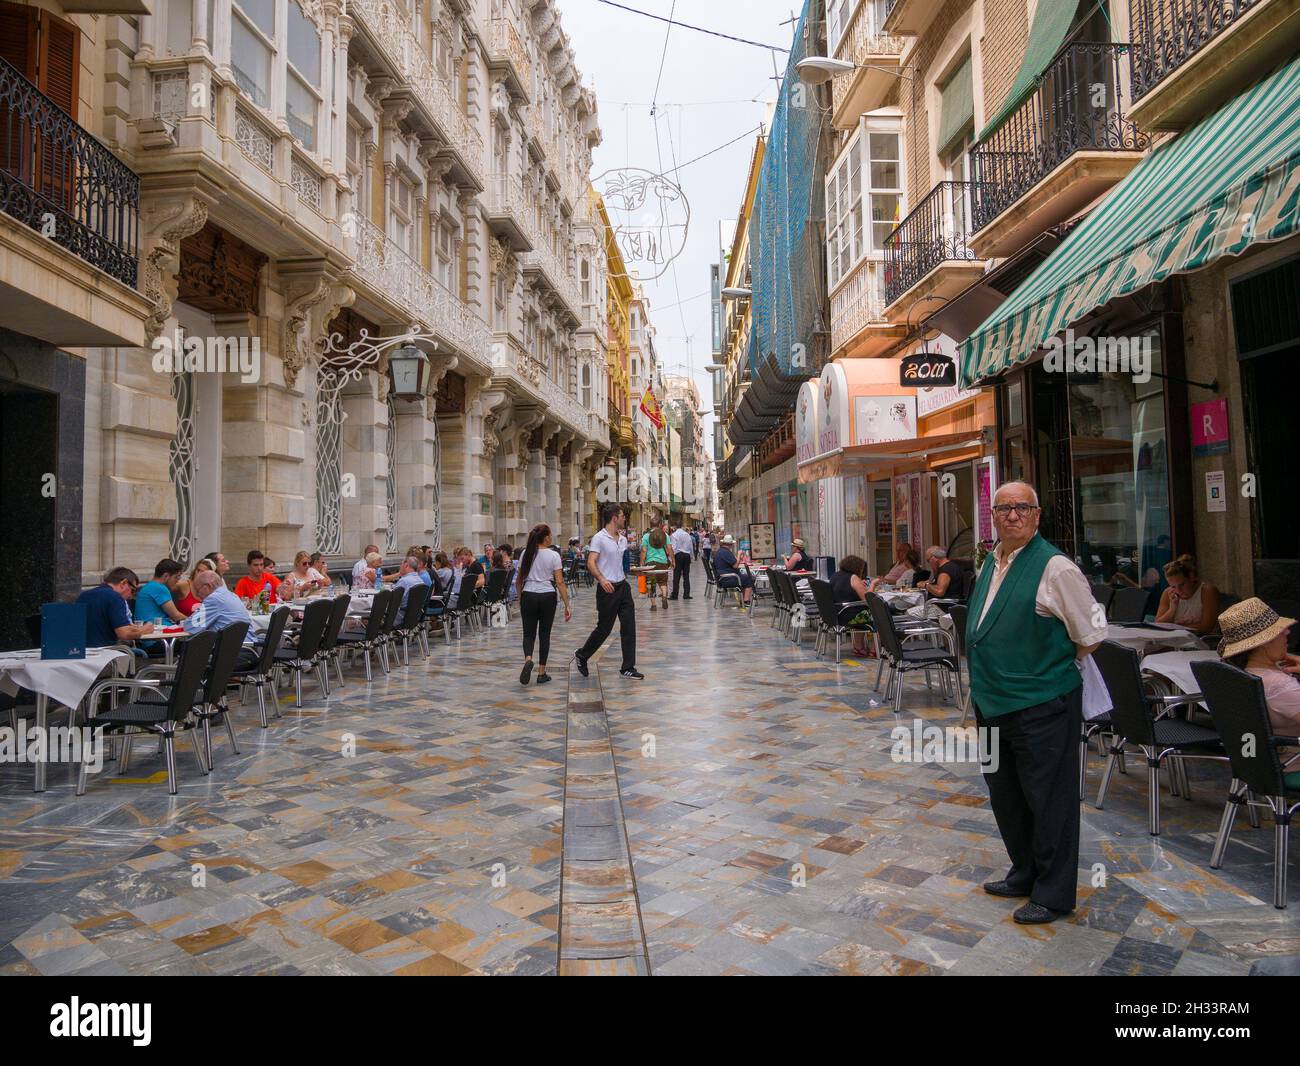 Diners line the street outside restaurants in the Mediterranean city of Cartagena, Spain. Stock Photo